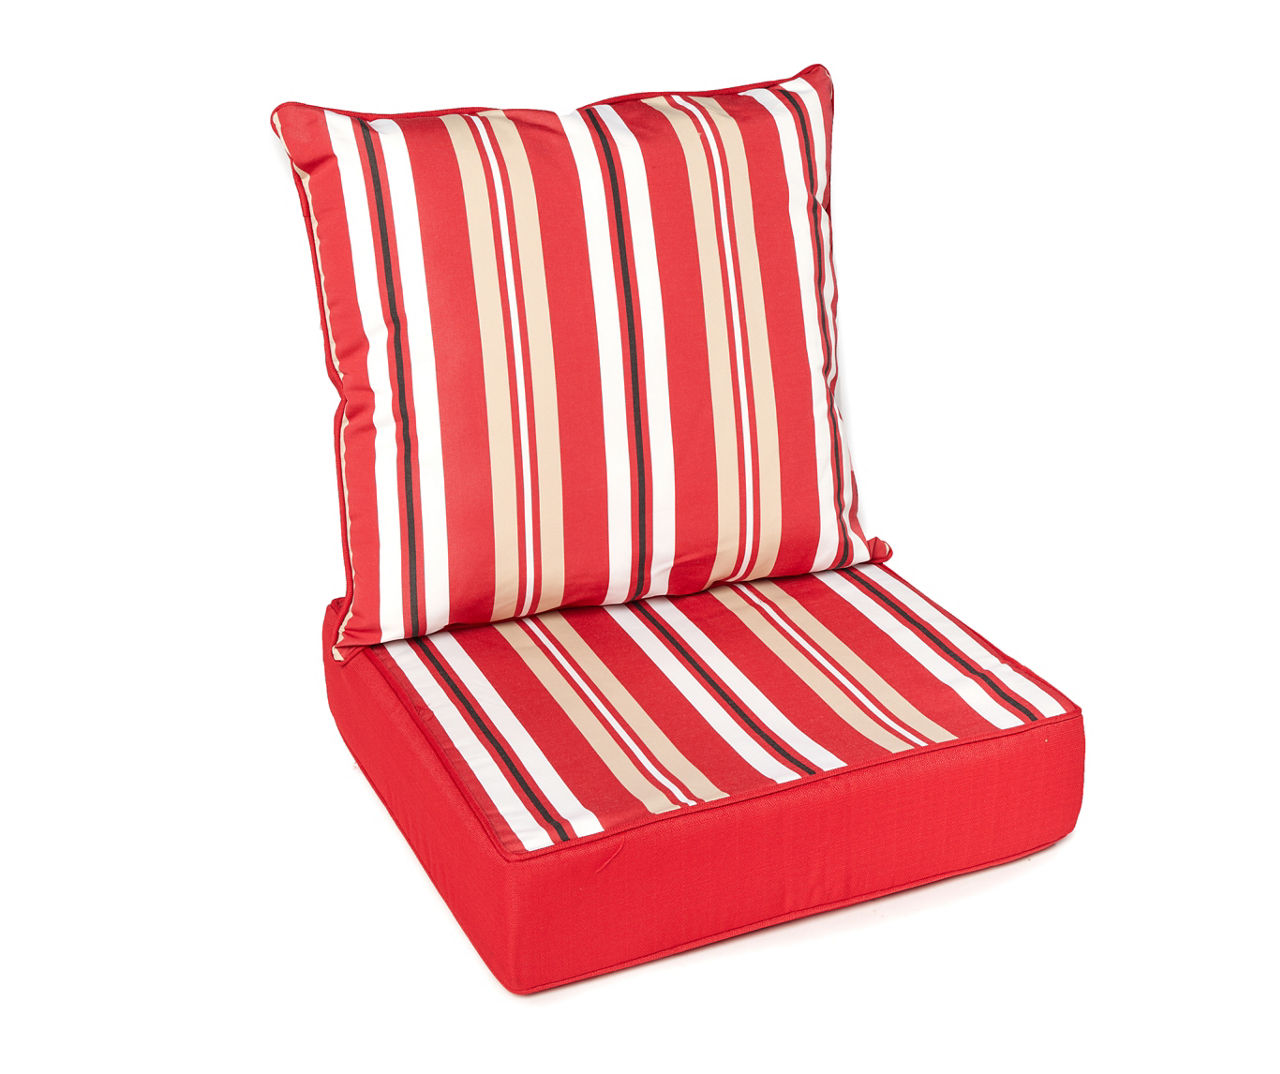 Patio Outdoor/Indoor Red Extra Large Chair Cushion 